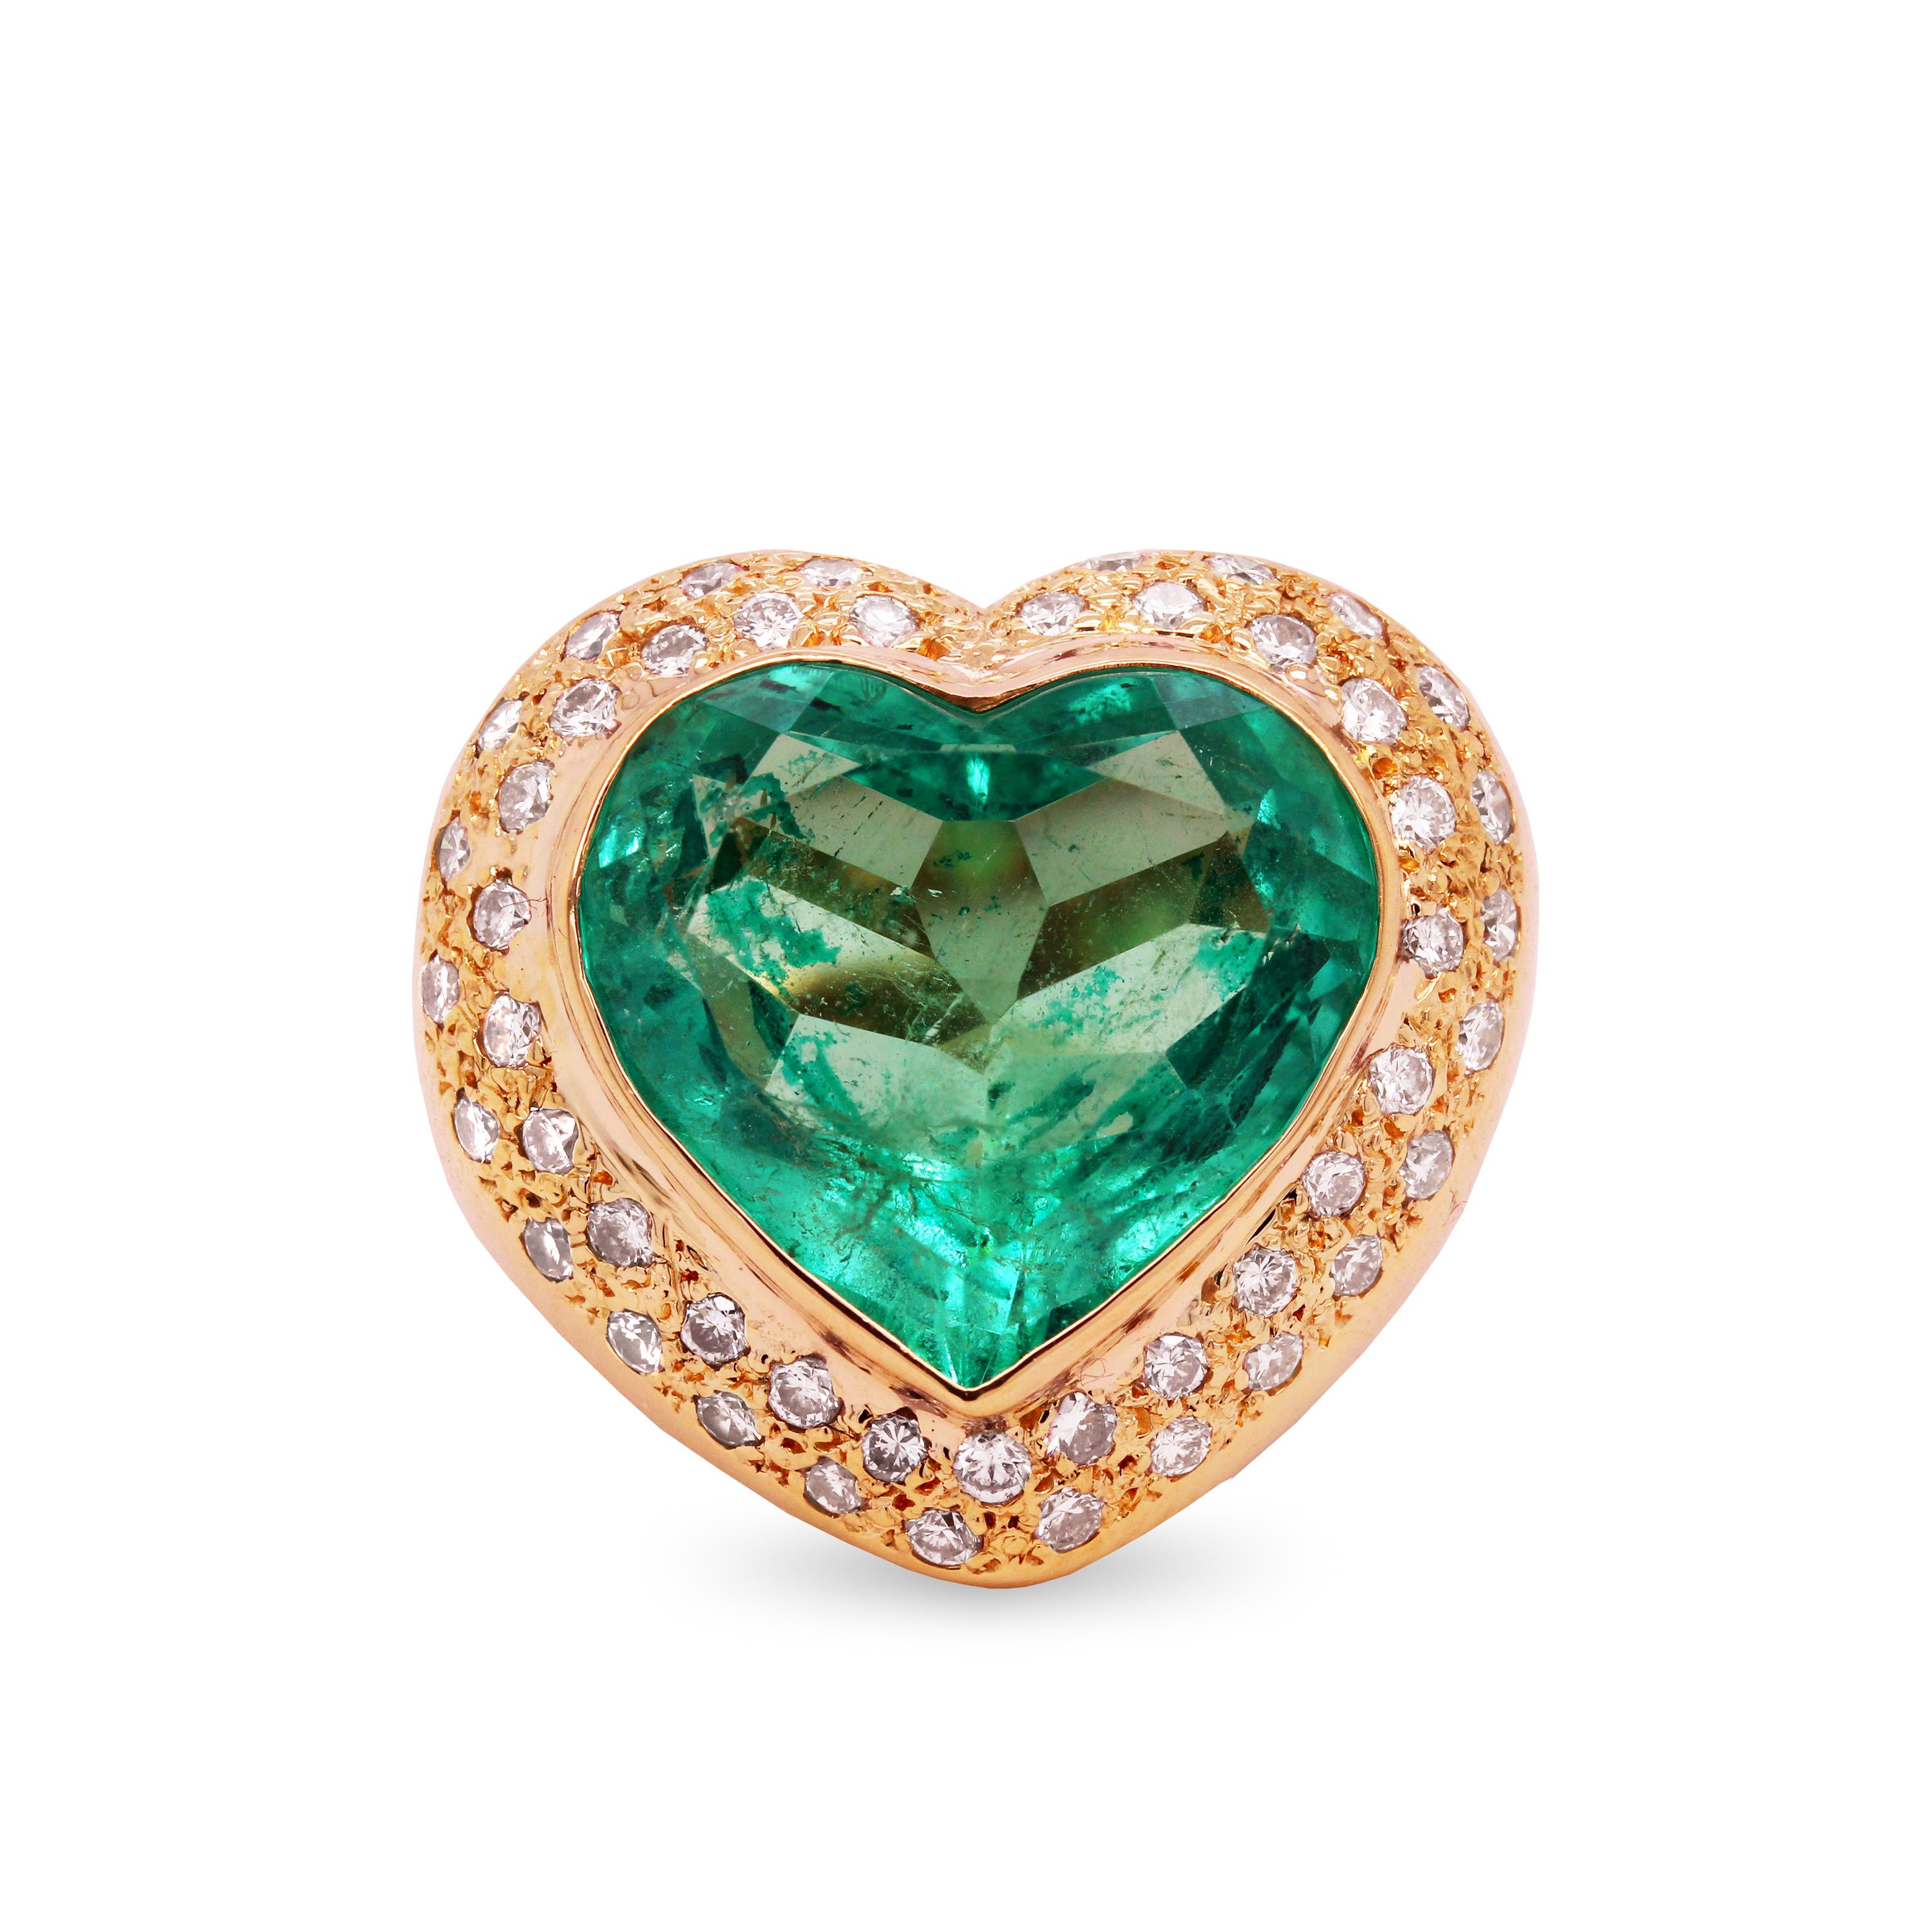 GIA Certified 8.79 Carat Heart Shape Colombian Emerald 18K Gold Diamond Ring

This one-of-a-kind ring features an incredible, large and vibrant, heart-shape Colombian Emerald set with diamonds surrounding.

The Emerald is classified as moderate